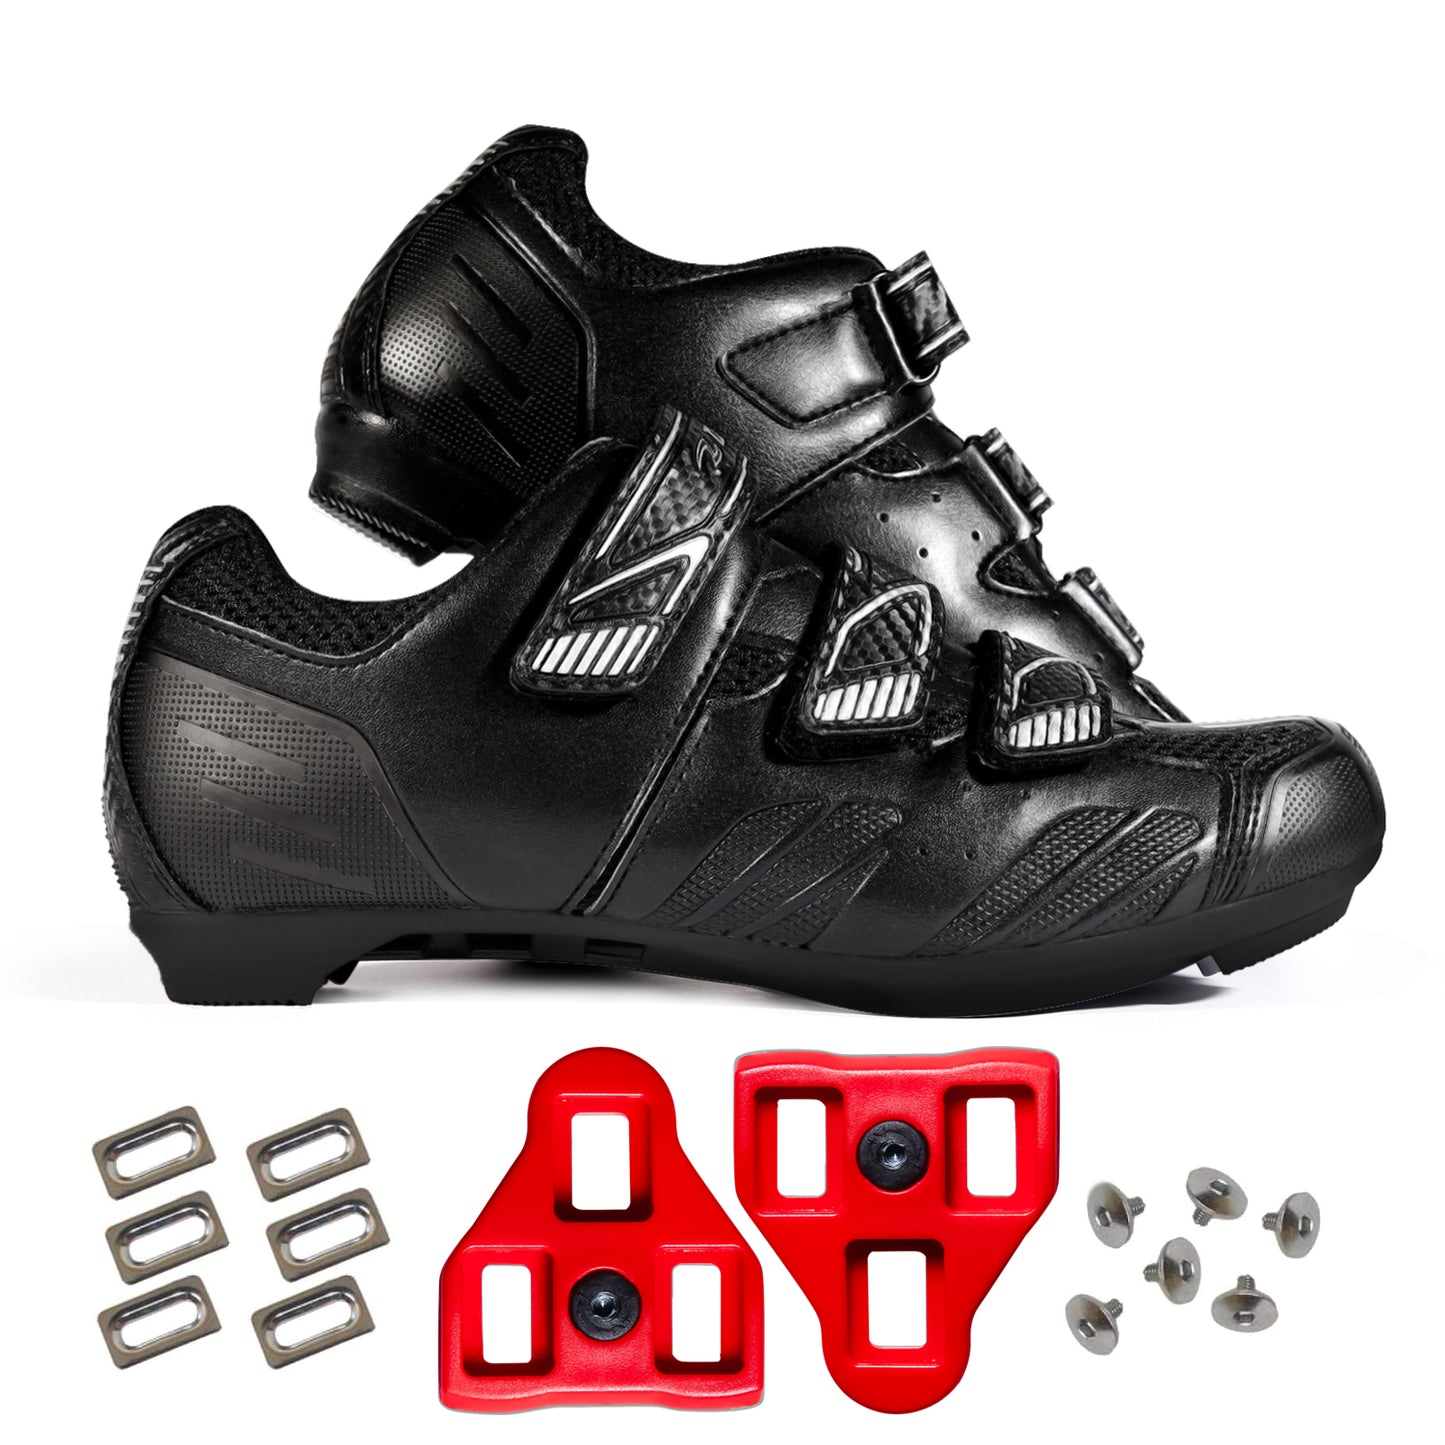 Zol Stage Road Cycling Shoes with Delta Look Cleats Compatible with Peloton - Zol Cycling